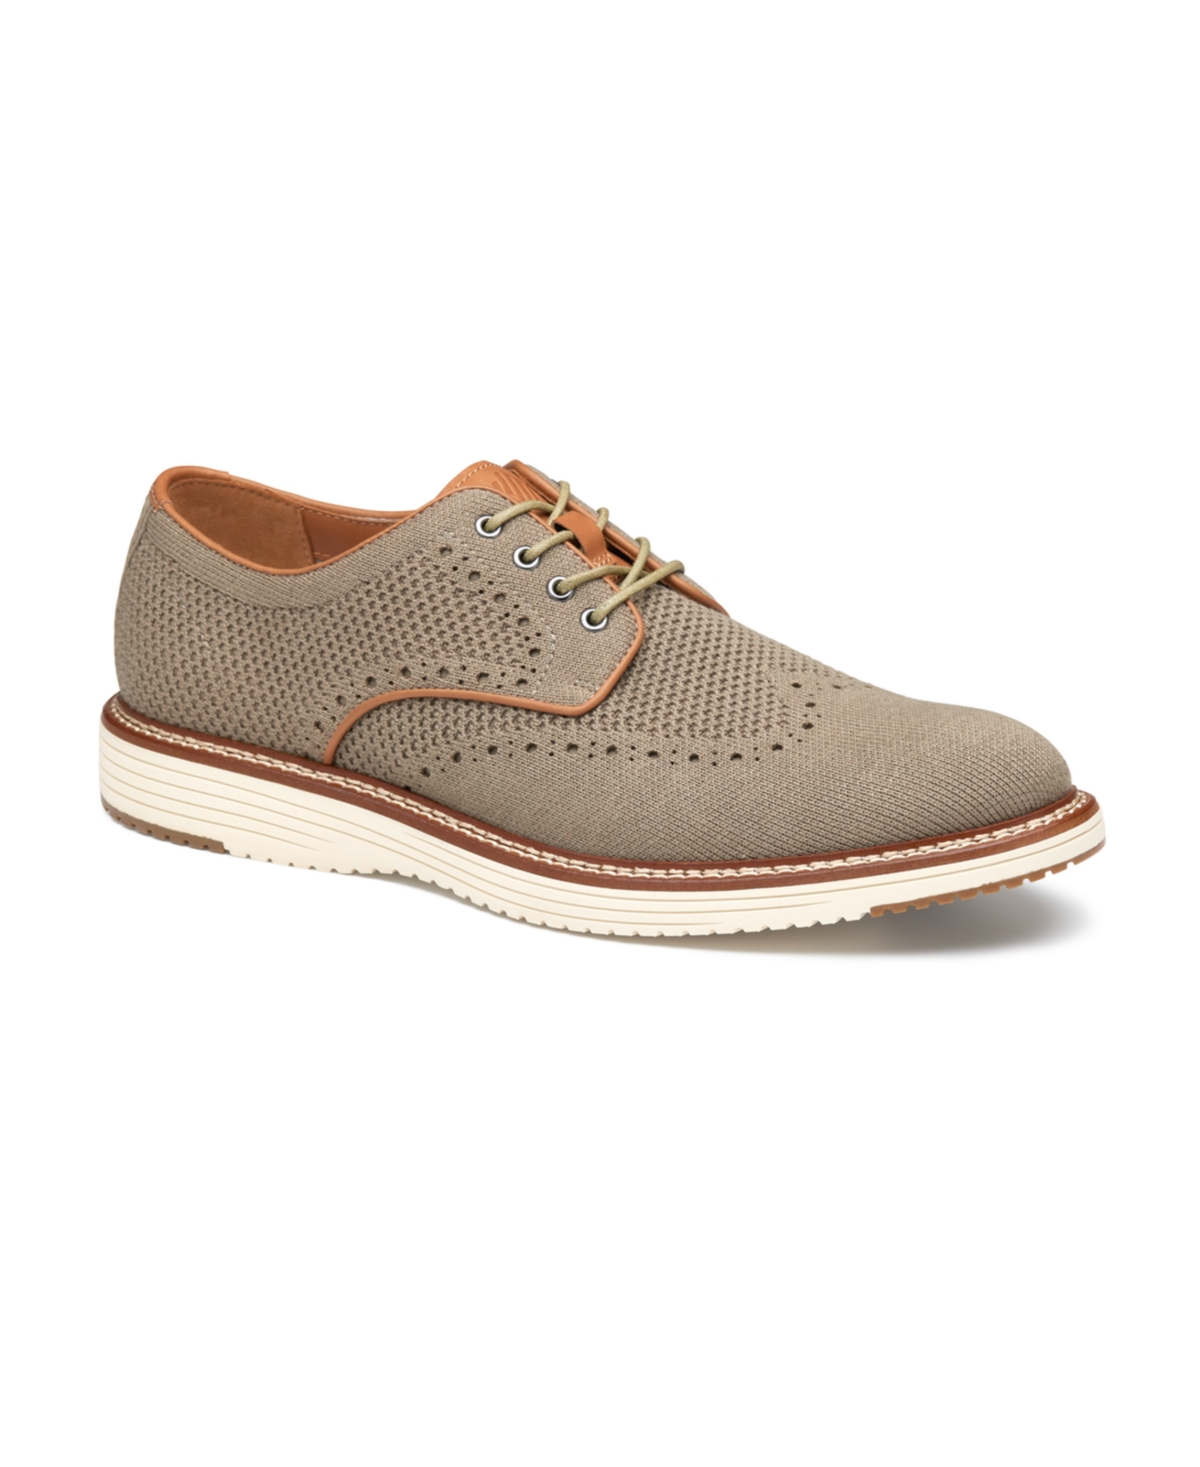 Men's Upton Knit Wingtip Dress Casual Lace Up Sneakers - Dark Taupe